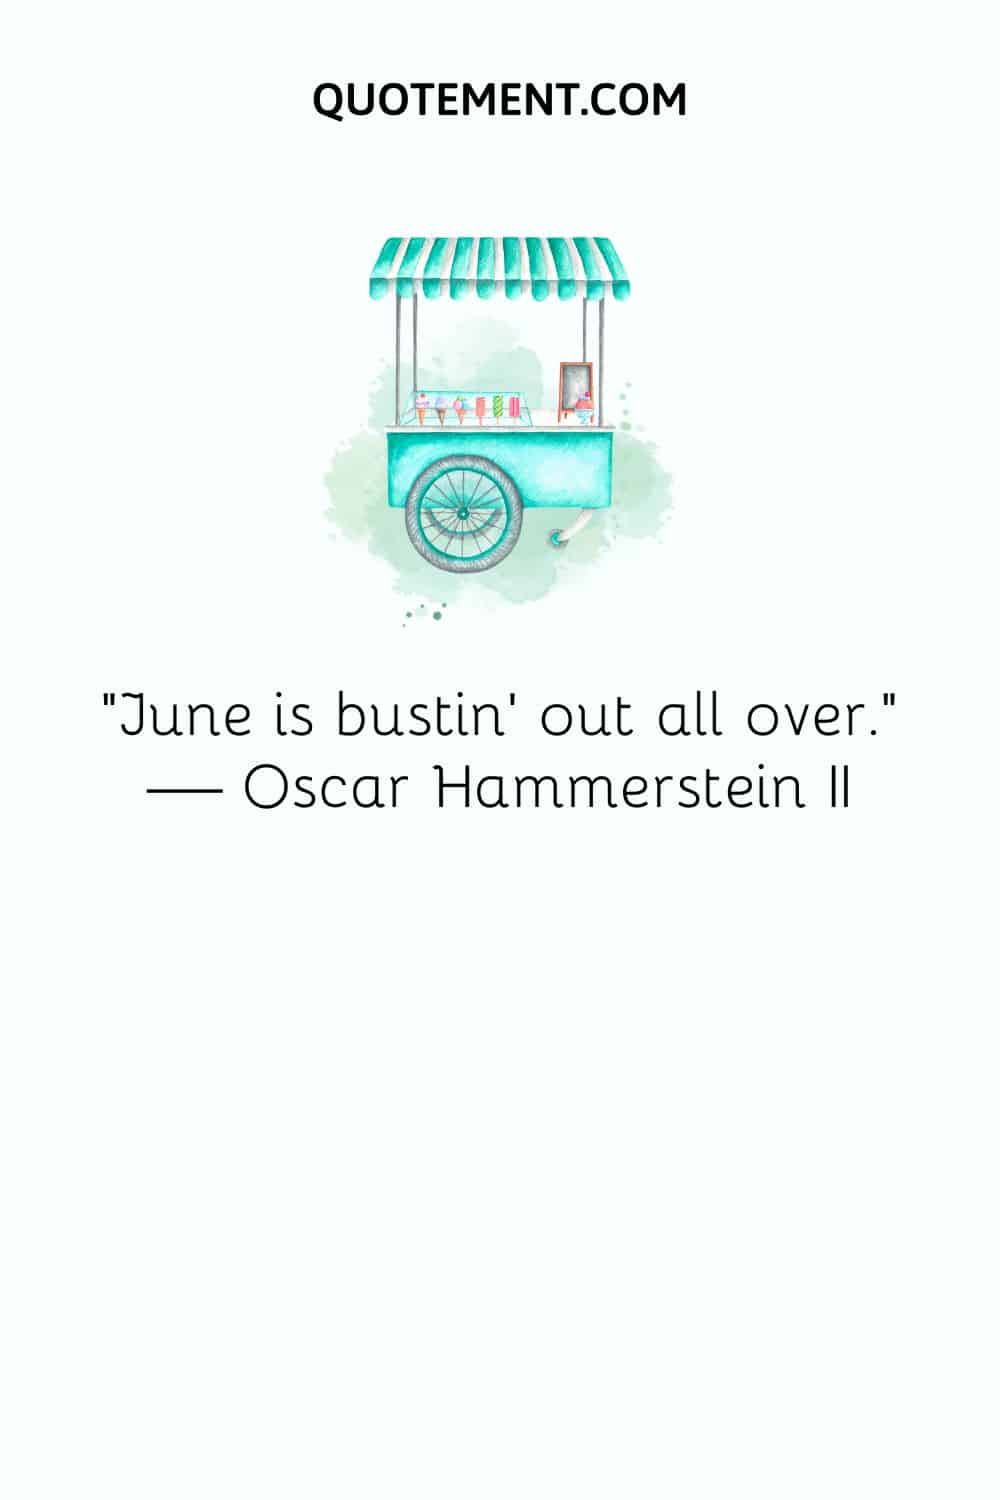 “June is bustin’ out all over.” — Oscar Hammerstein II